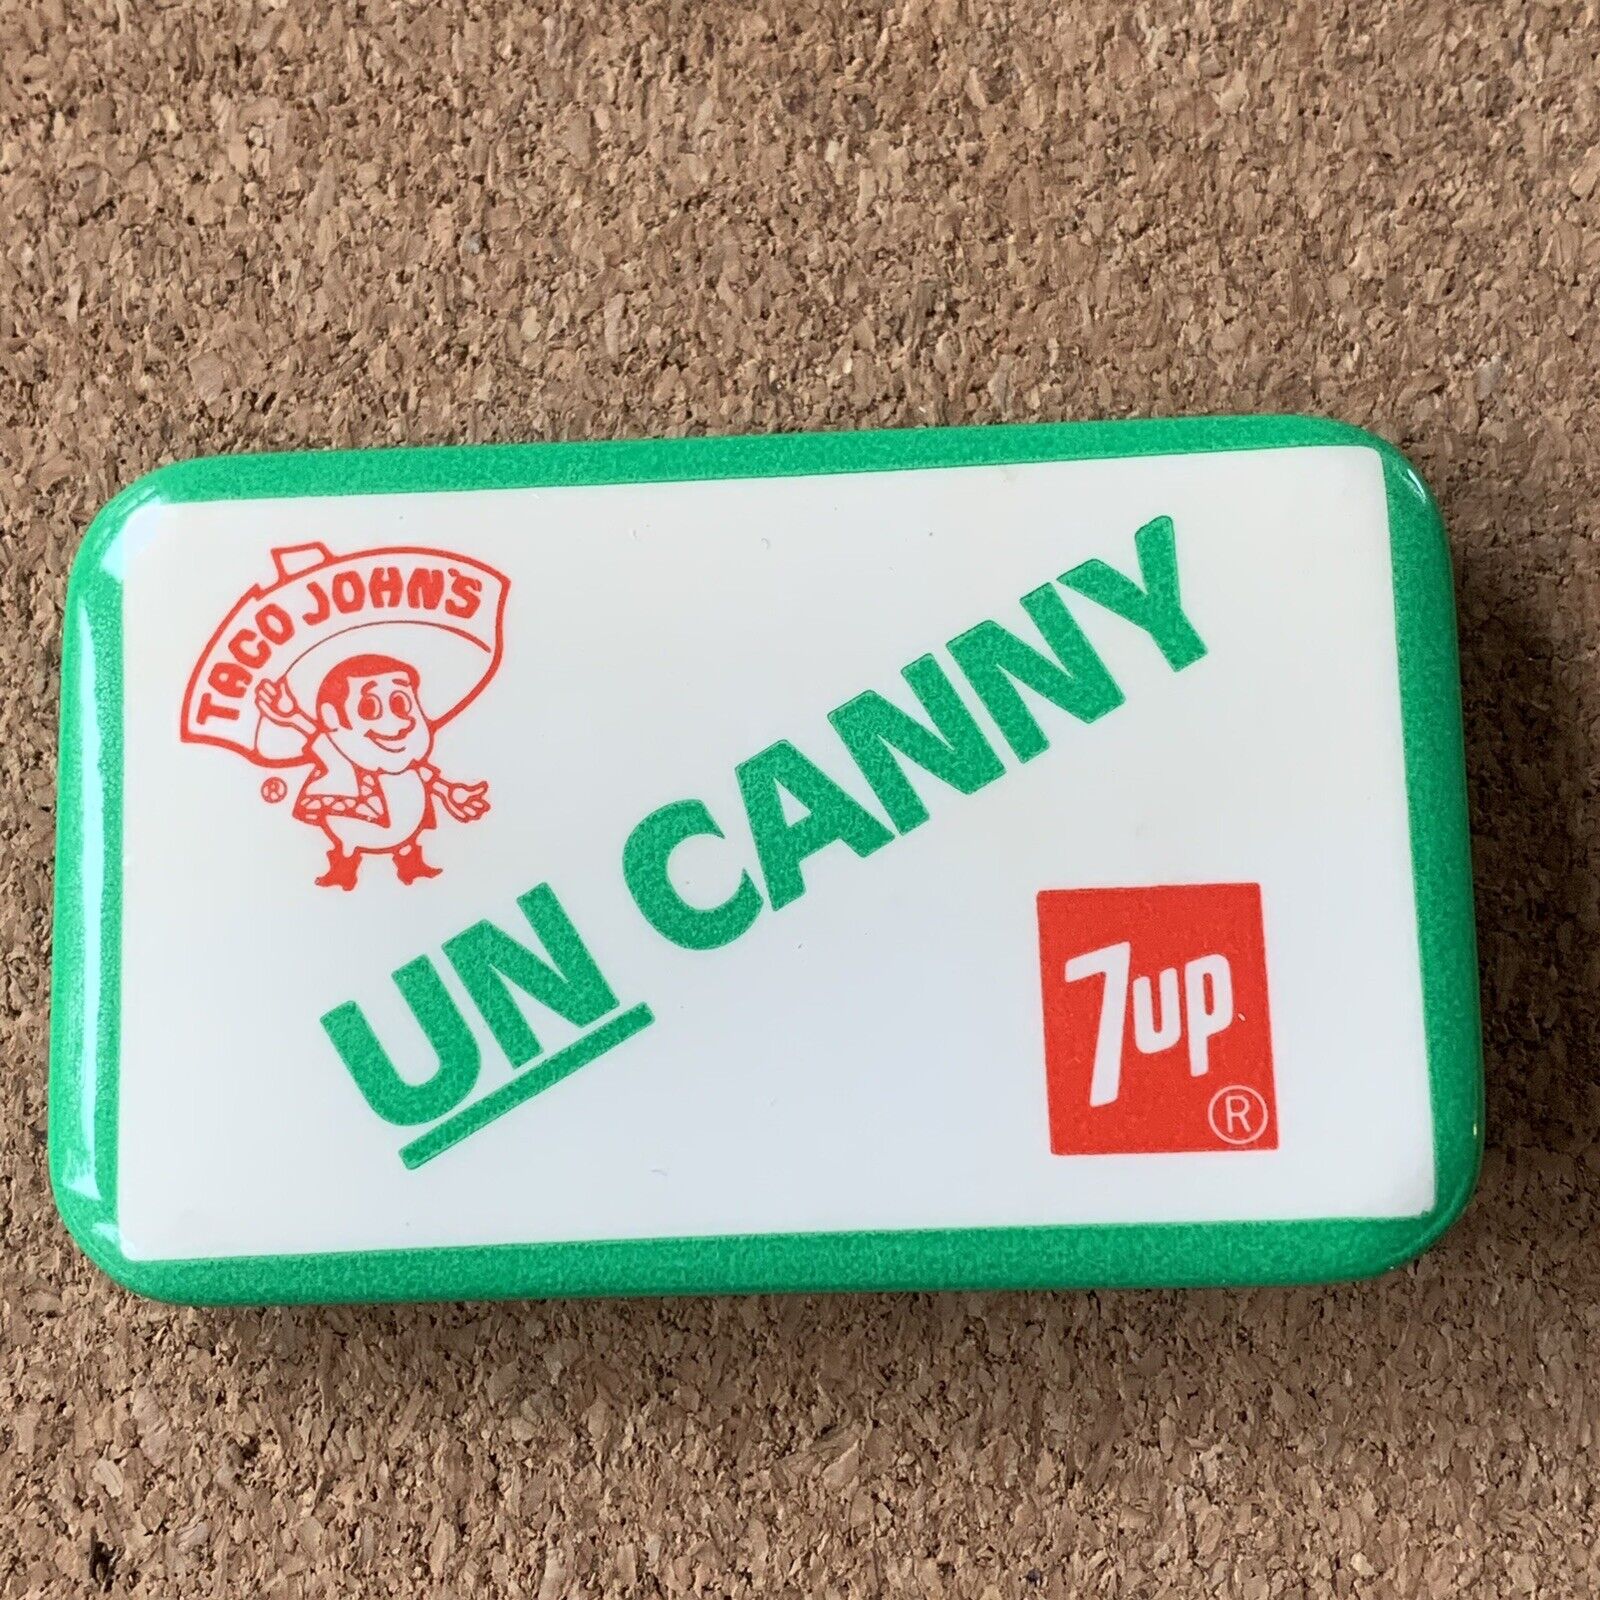 Vintage Advertising 7 Up Taco Johns The Uncanny 3” Pin back Green Button